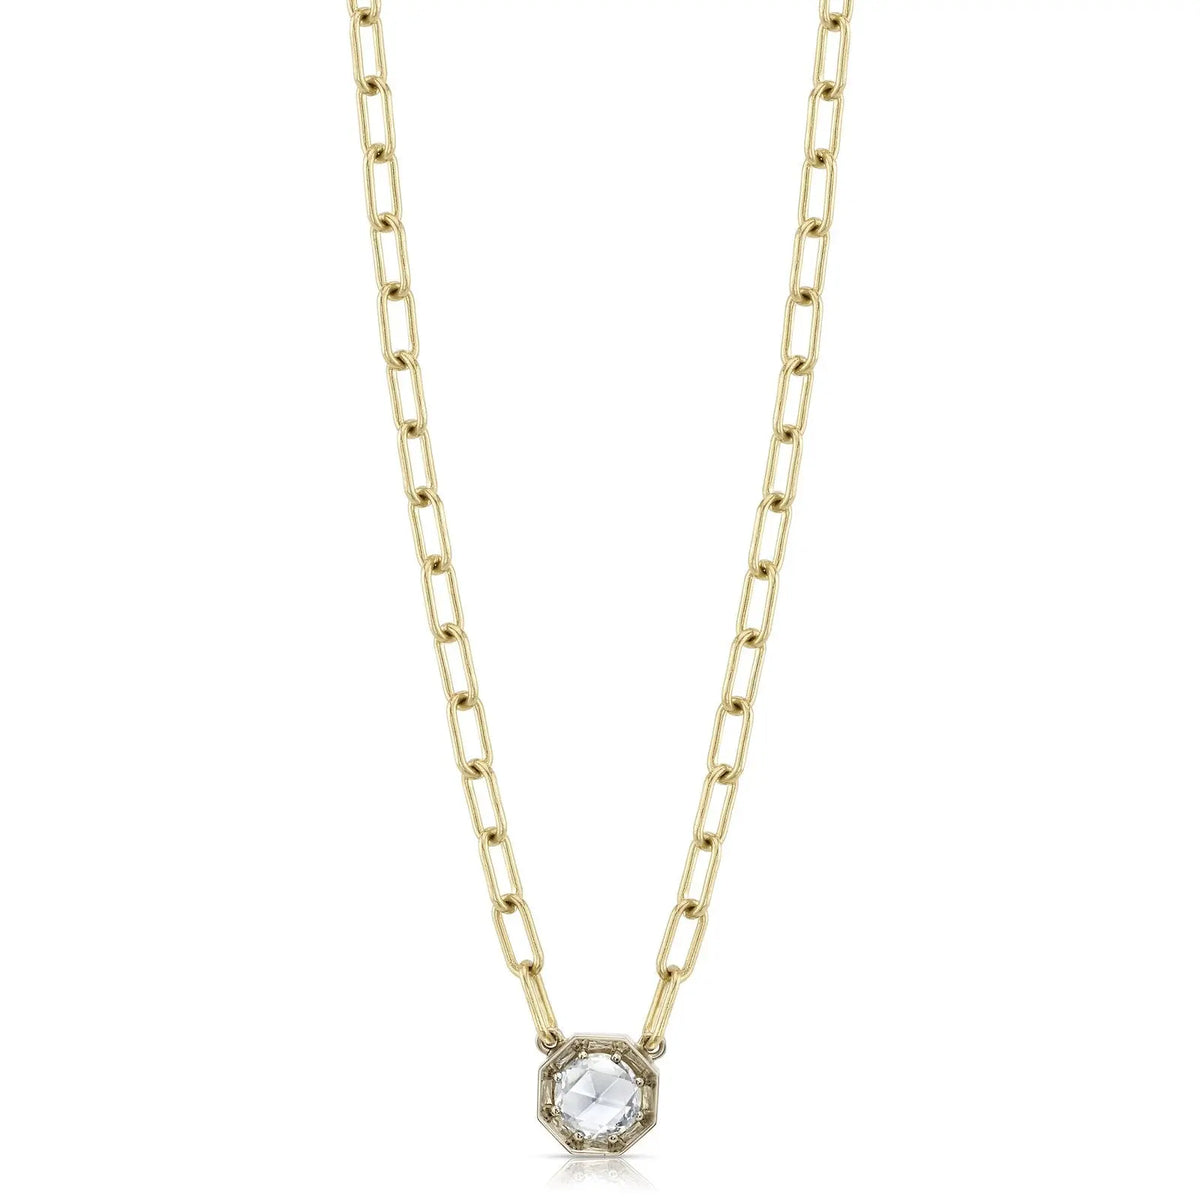 Diamond Summer Necklaces with .68 ISI1  GIA certified Rose cut diamond set in a handcrafted 18K champagne gold pendant. Pendant is set on a handcrafted 18K yellow gold bond chain.  Necklace measures 17&quot;.  Designed by Single Stone